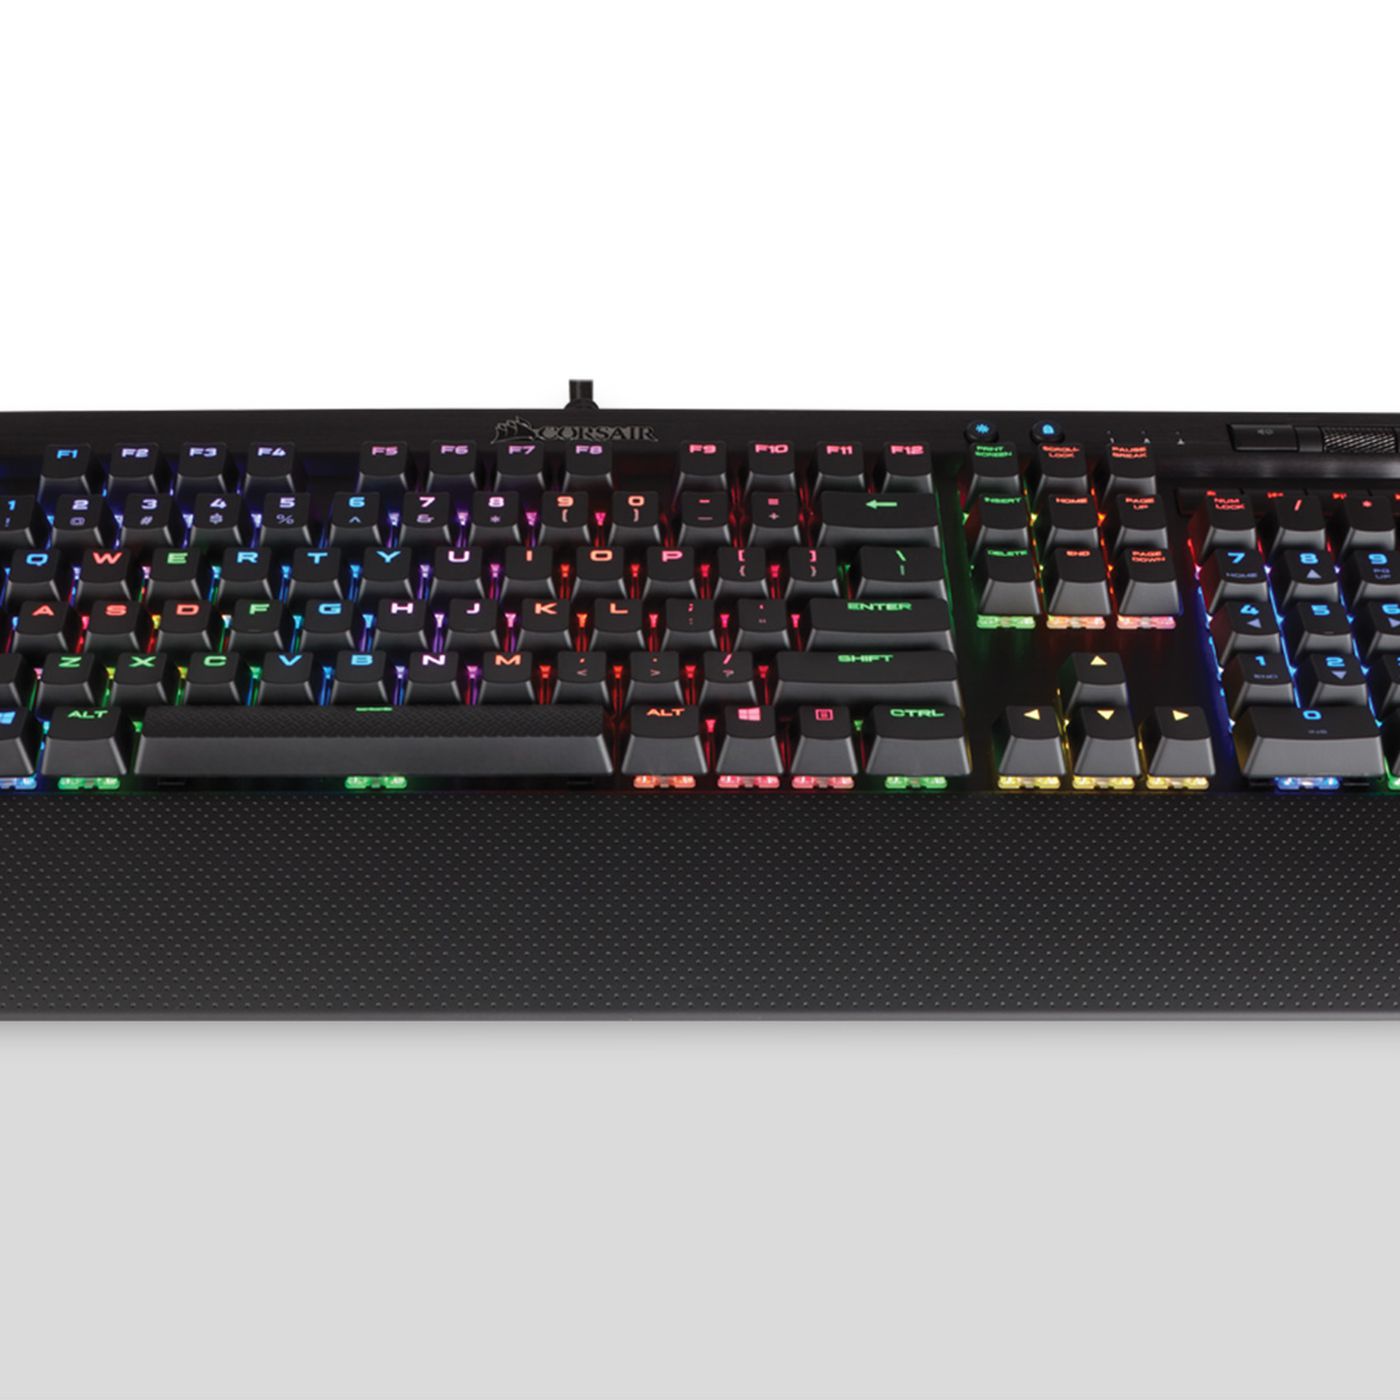 Ørken direkte Champagne Corsair's Lux mechanical keyboards are now available internationally - The  Verge